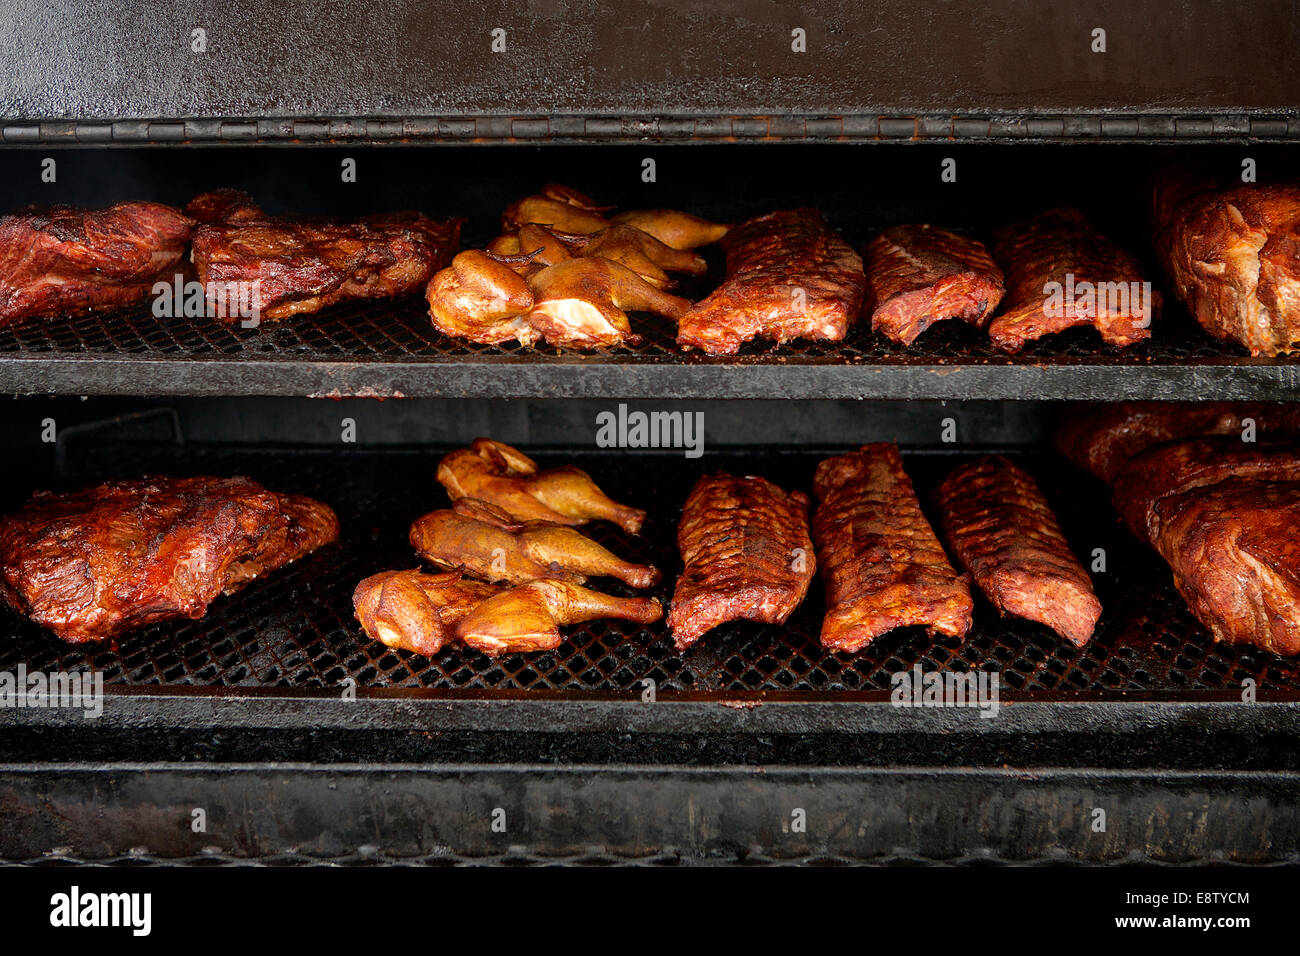 Chicken, Beef Brisket, and Pork Ribs in the smoker. Stock Photo